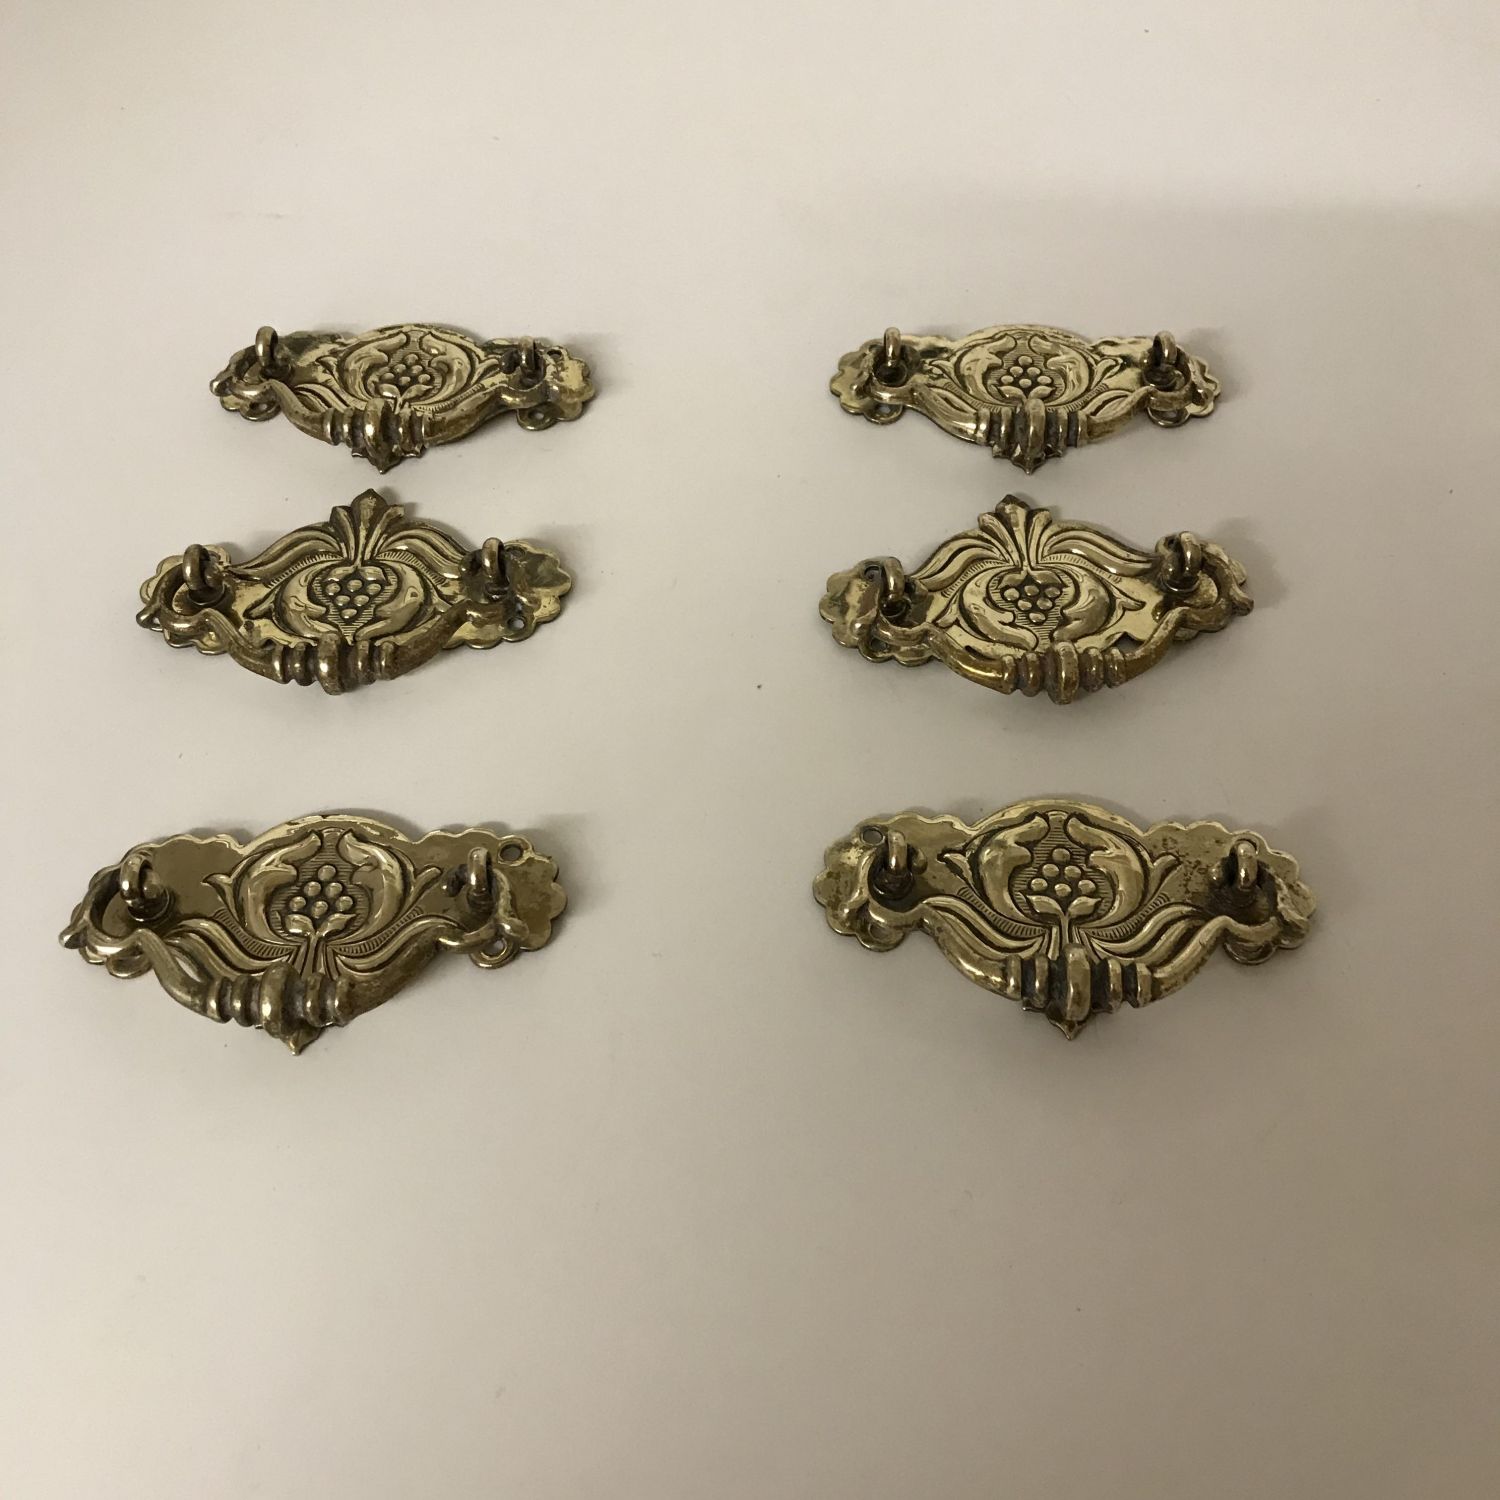 Set of 6 Art Nouveau Brass Drawer Handles circa 1900 Gifts for Every